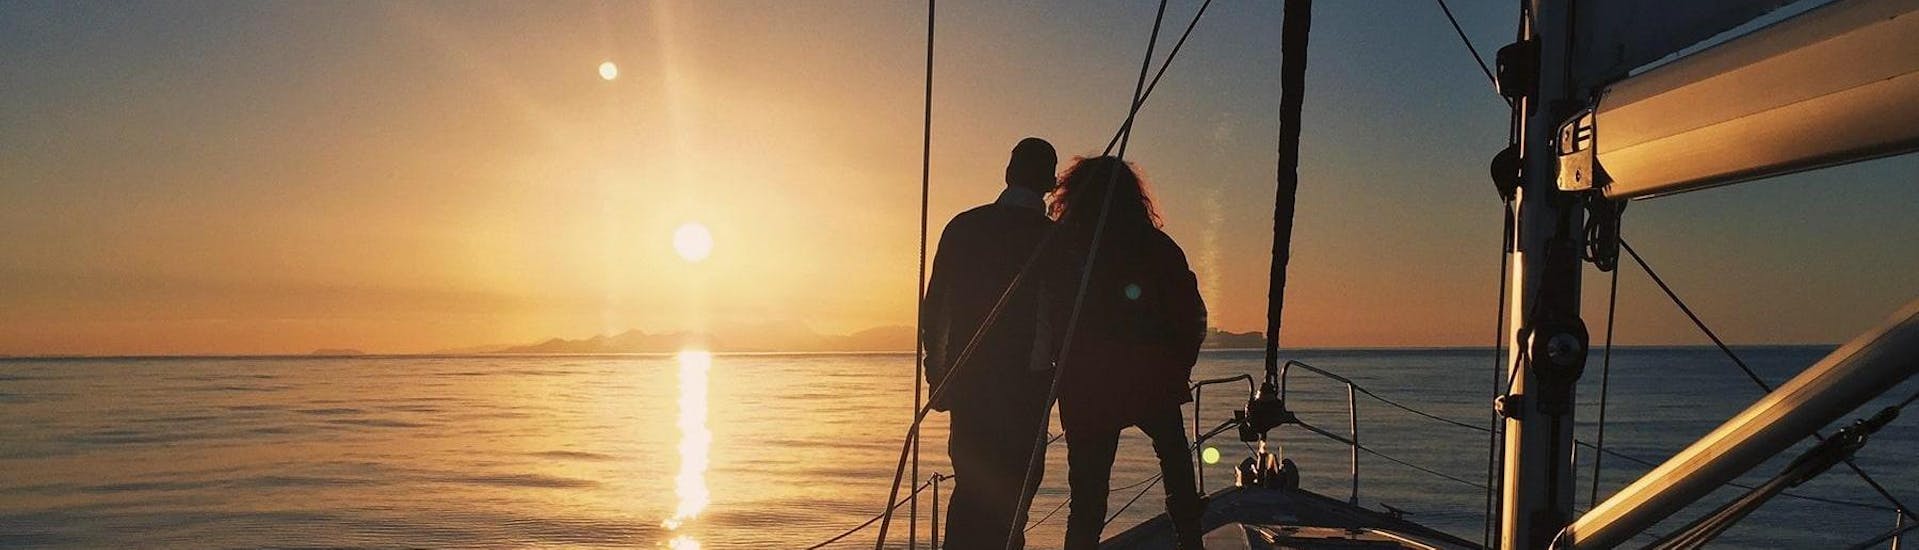 During the Private Sunset Sailing Tour with Romantic Dinner - Barcelona which is organised by Five Star Barcelona, a couple is enjoying the unique moments in the open sea when the sun disappears behind the horizon.